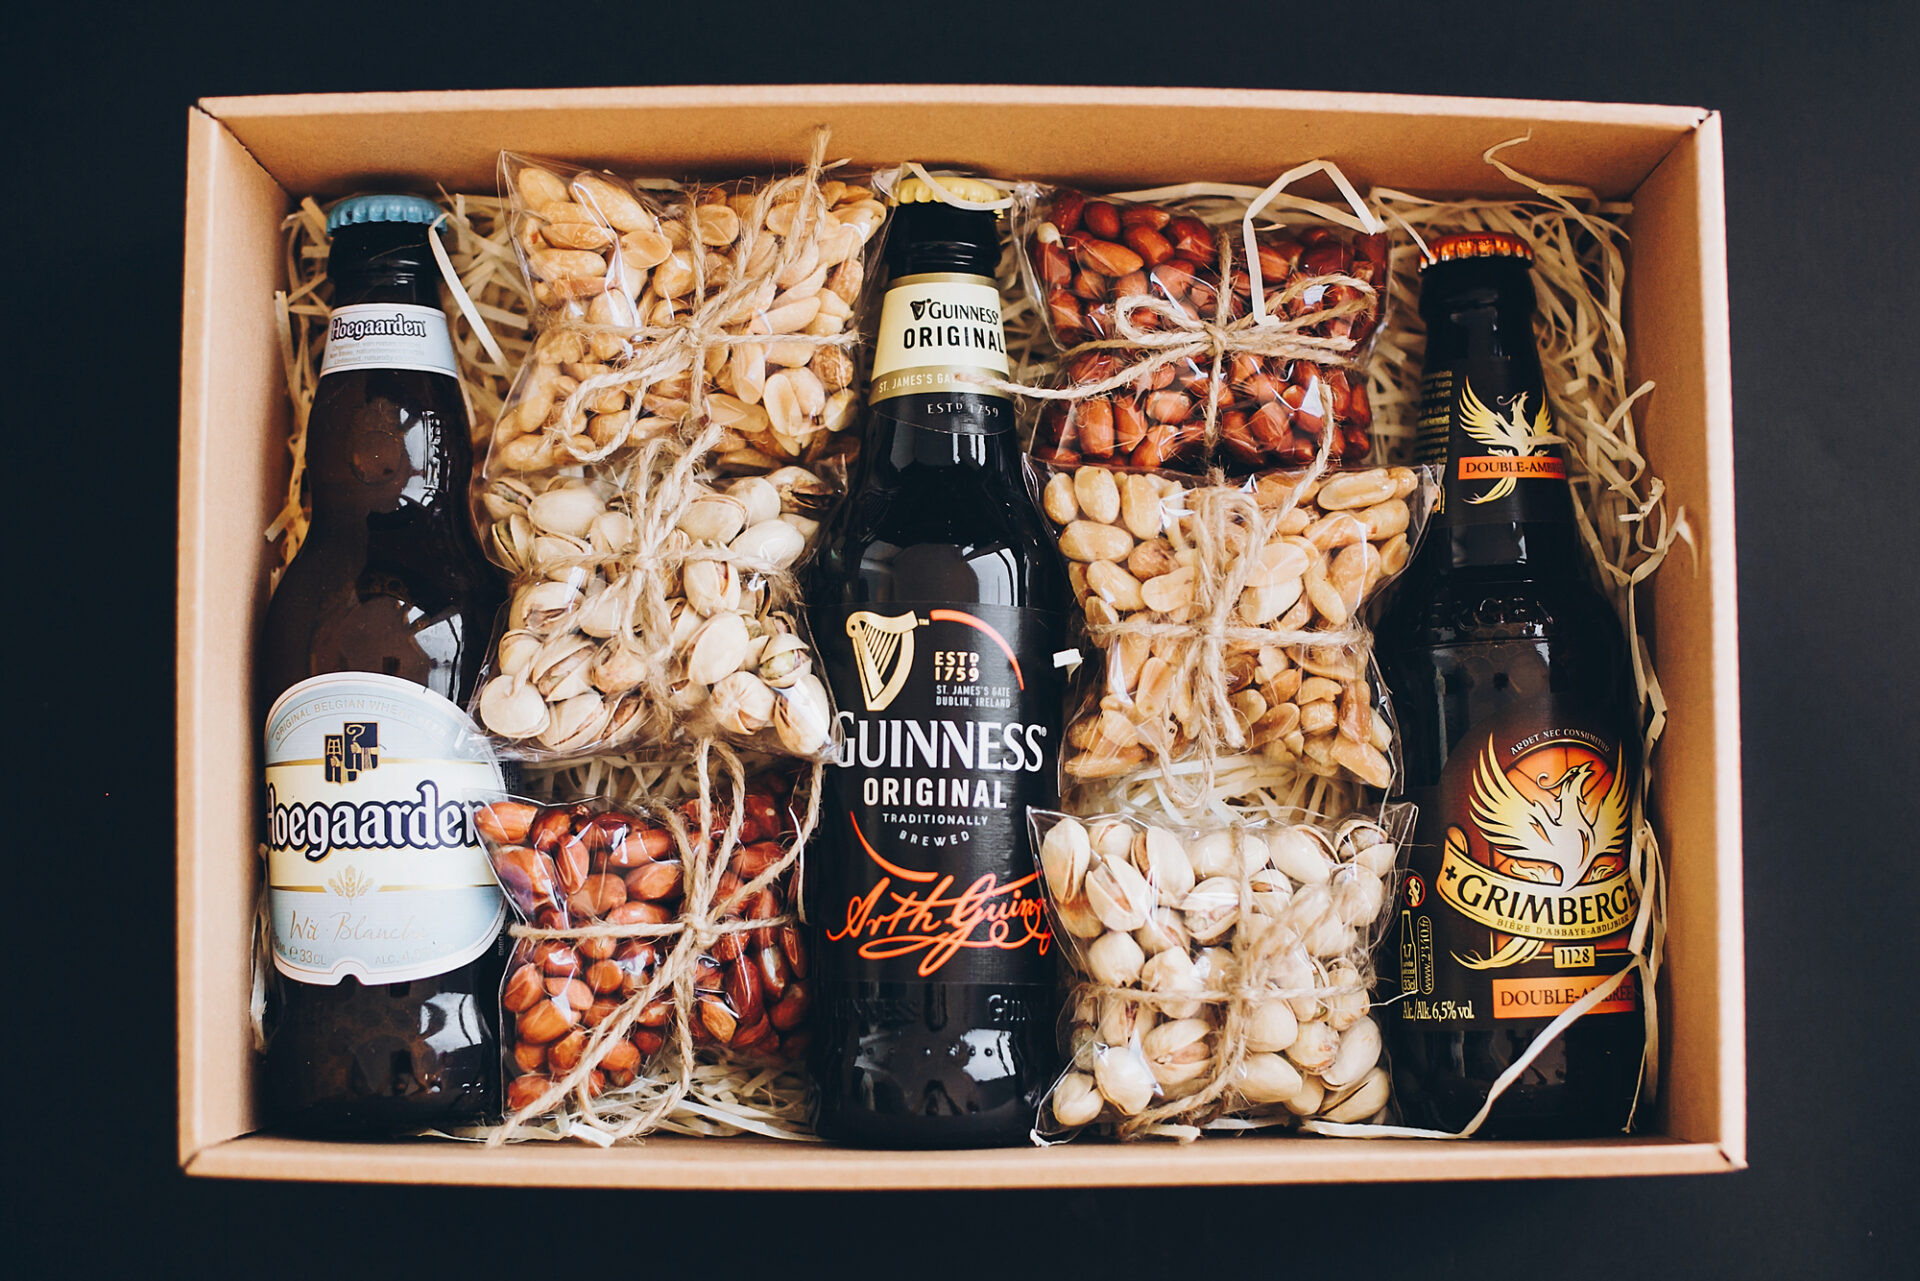 The 23 Best Gifts for Beer Lovers – Your Festive Guide